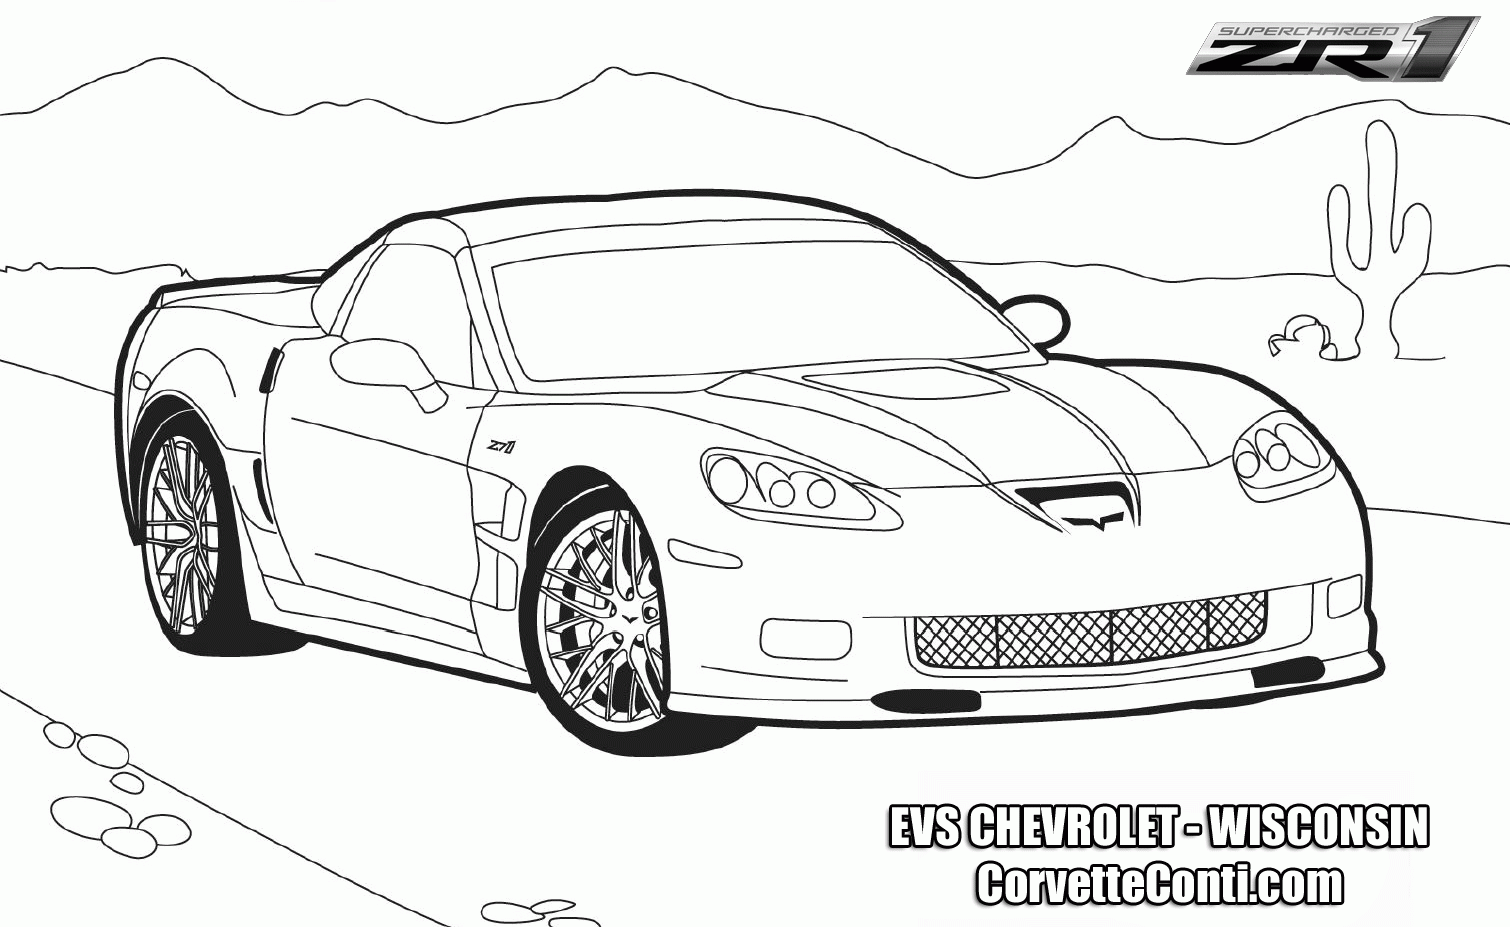 Corvette Coloring Page - Coloring Pages for Kids and for Adults